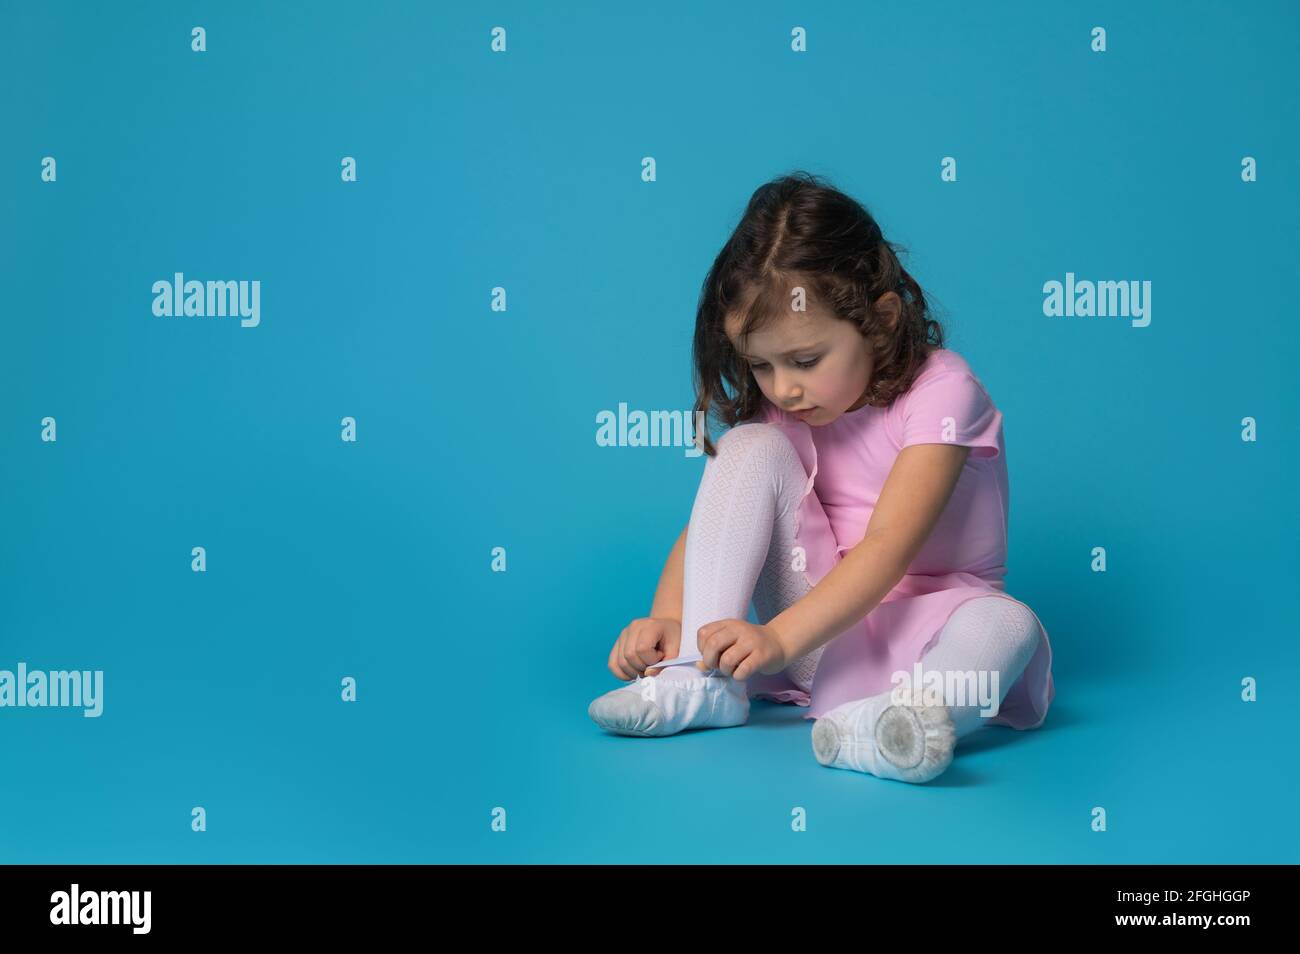 Cute ballerina focused on tying shoelaces on ballet shoes sitting on blue background with copy space Stock Photo